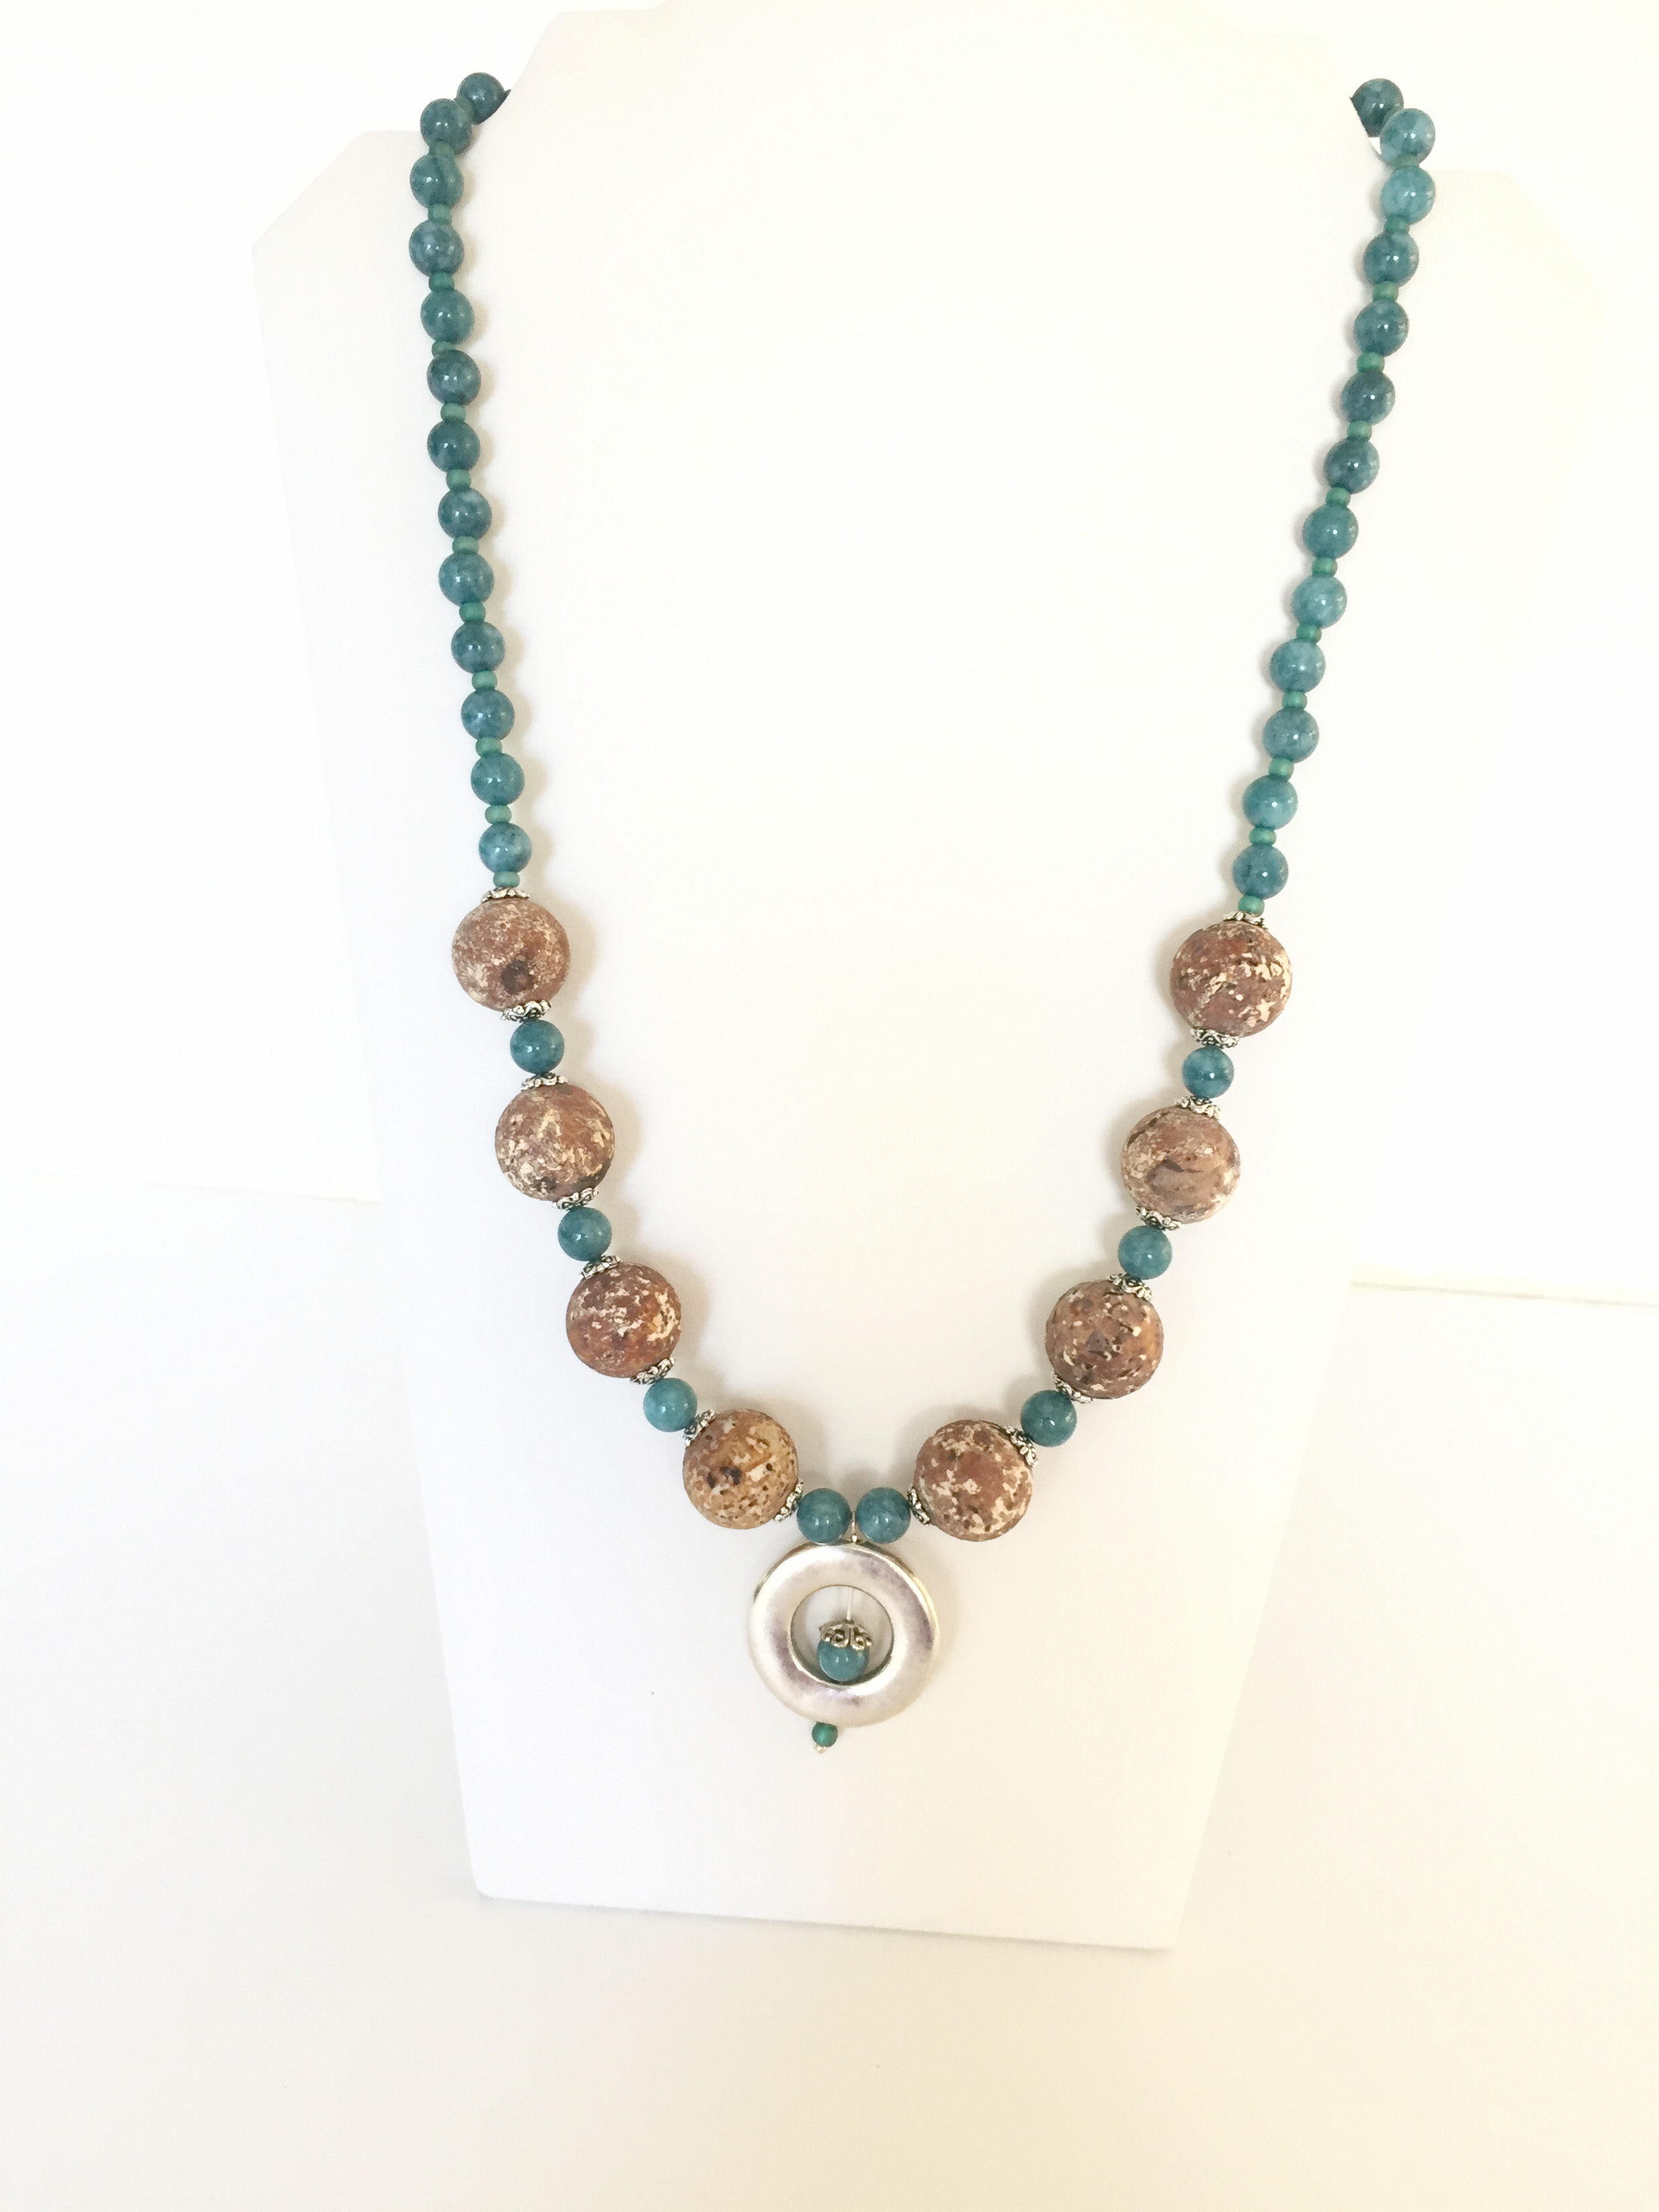 teal agate necklace